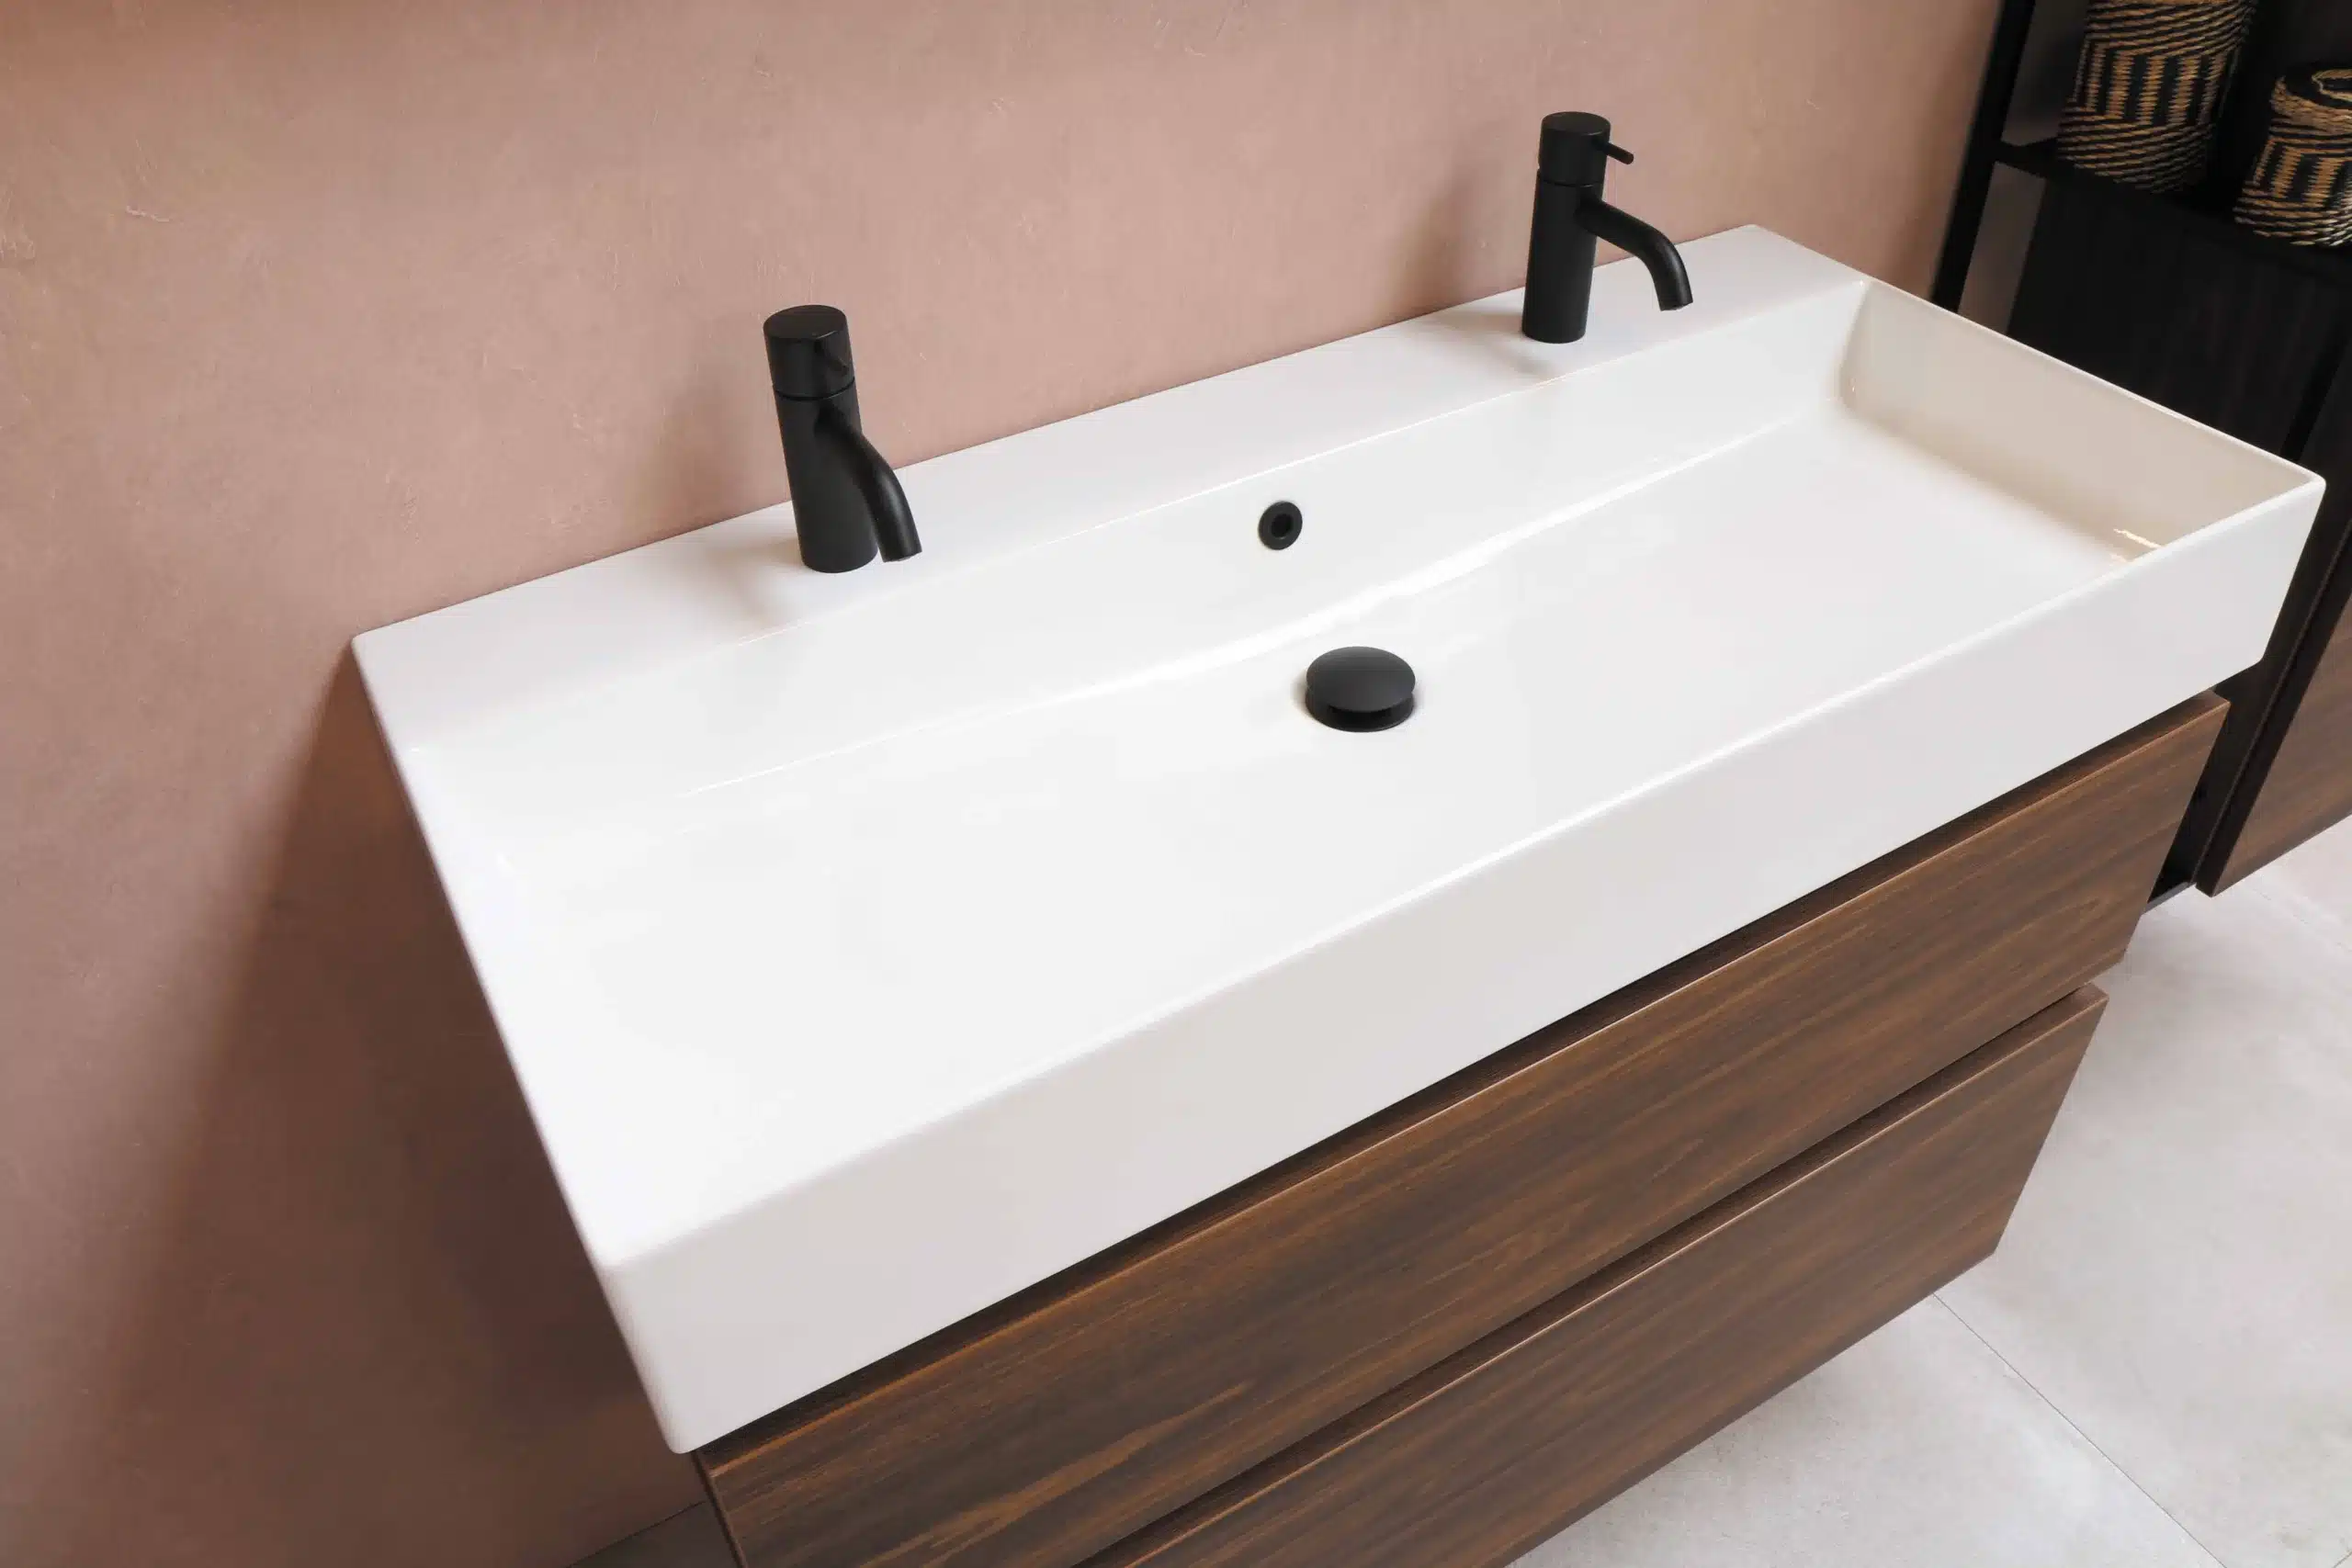 The Beauty and Functionality of a Farmhouse Sink in a Modular Kitchen